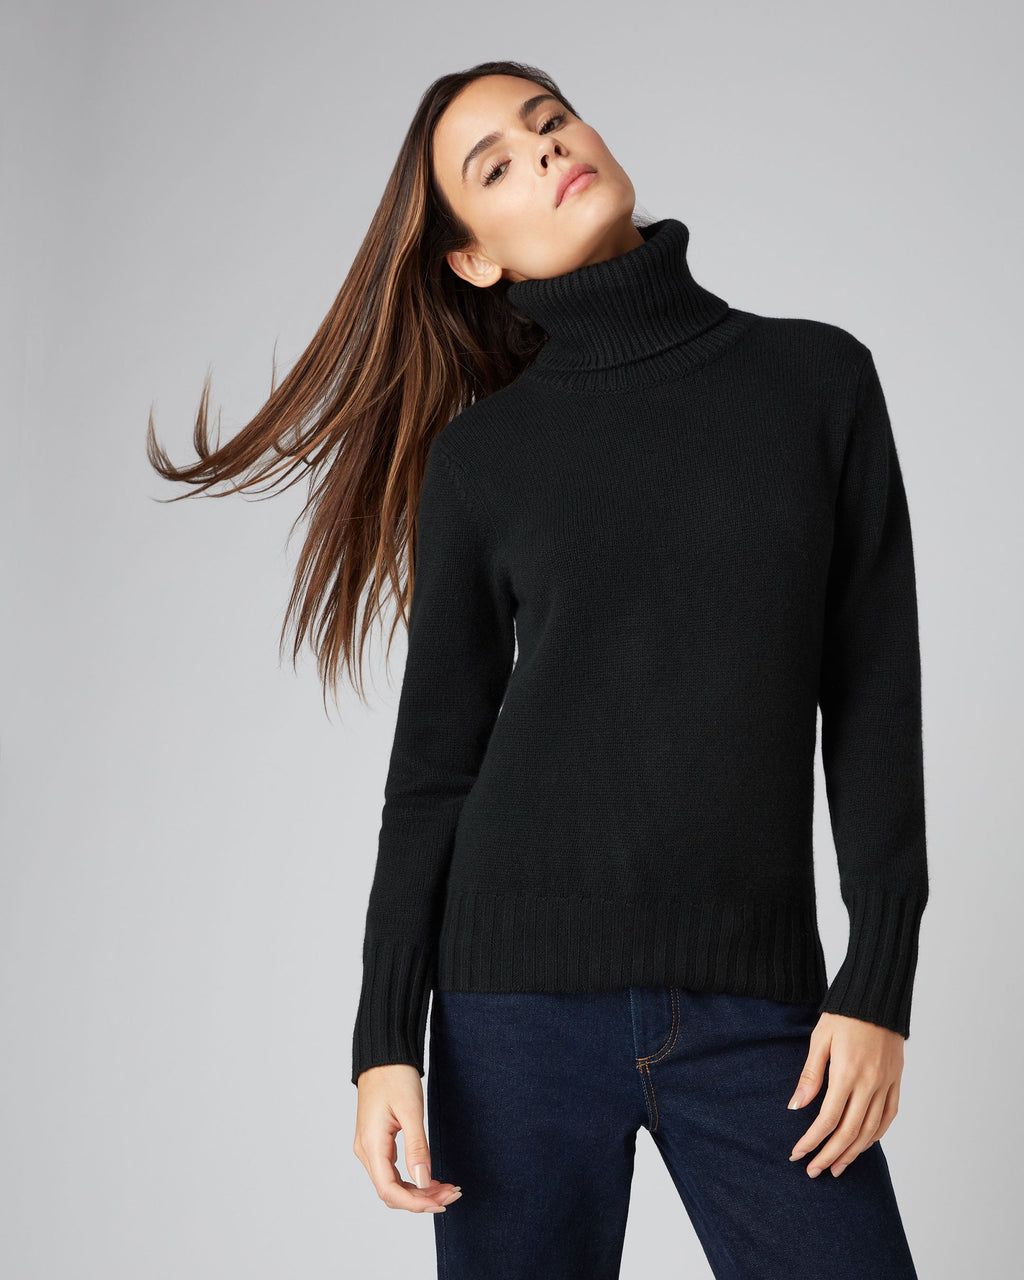 Women's Cashmere Turtleneck Sweaters, Free Delivery